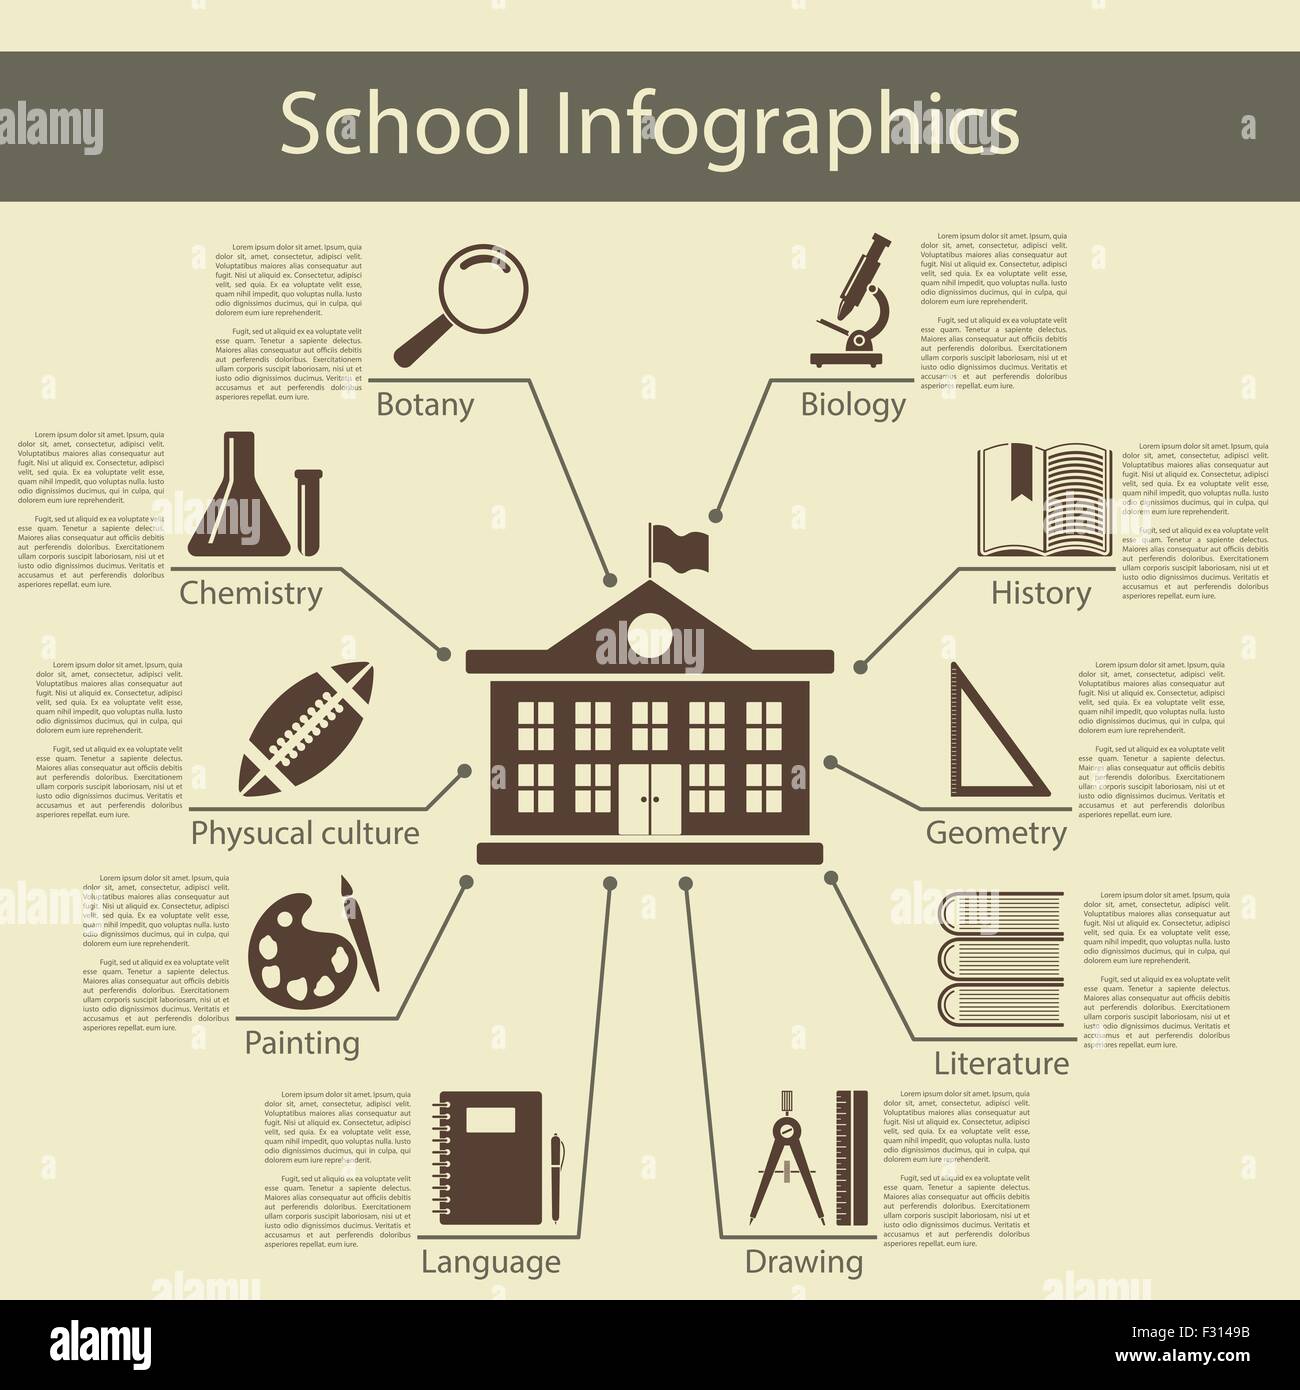 School Infographics With School Building And Symbol Of Different